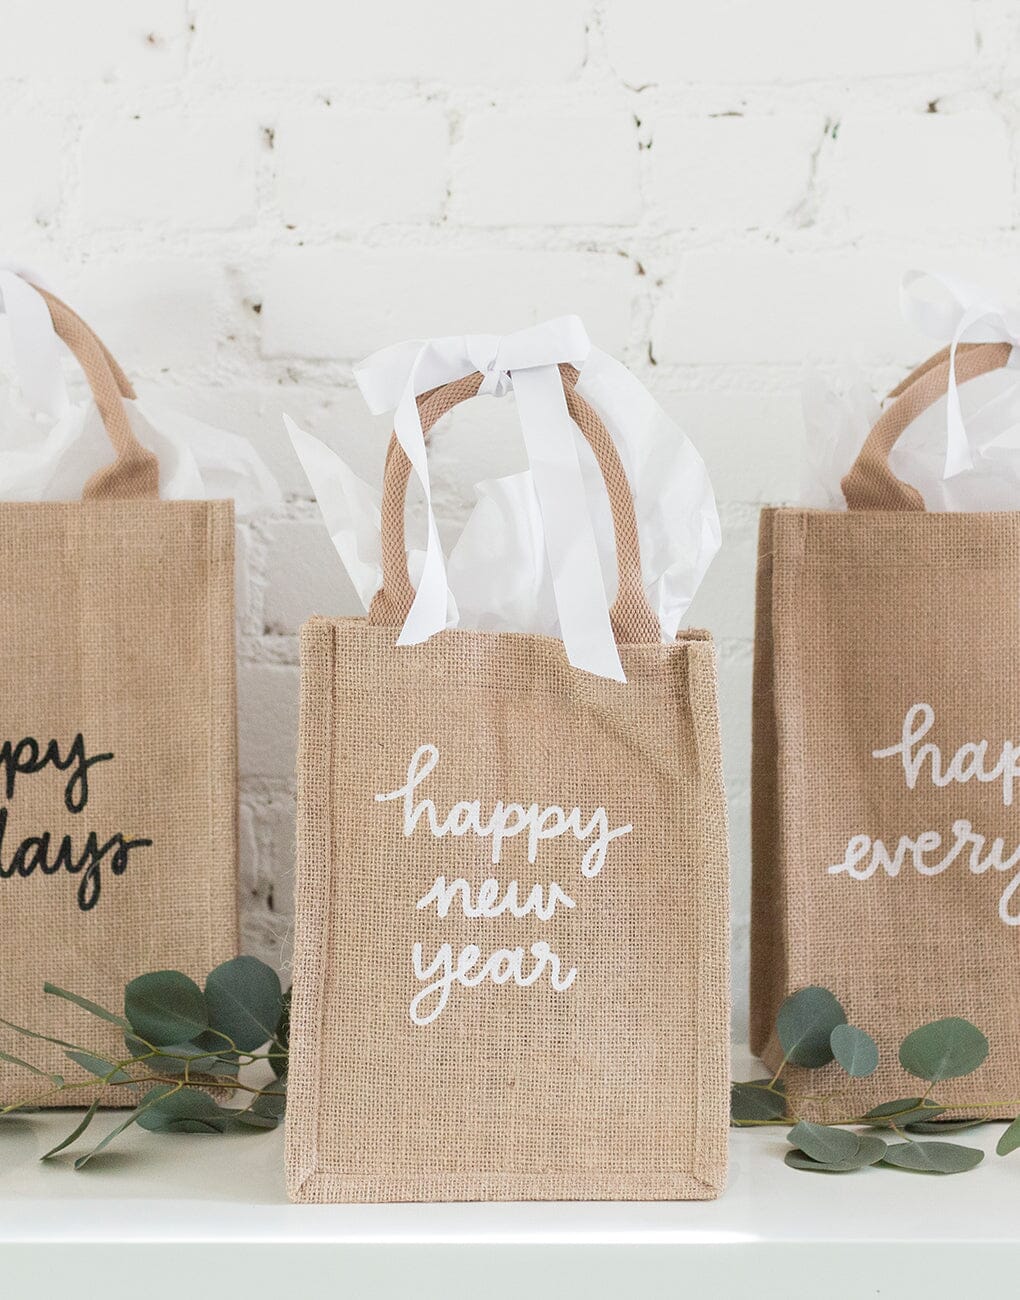 Small Happy New Year Reusable Gift Totes In Black And White Font | The Little Market